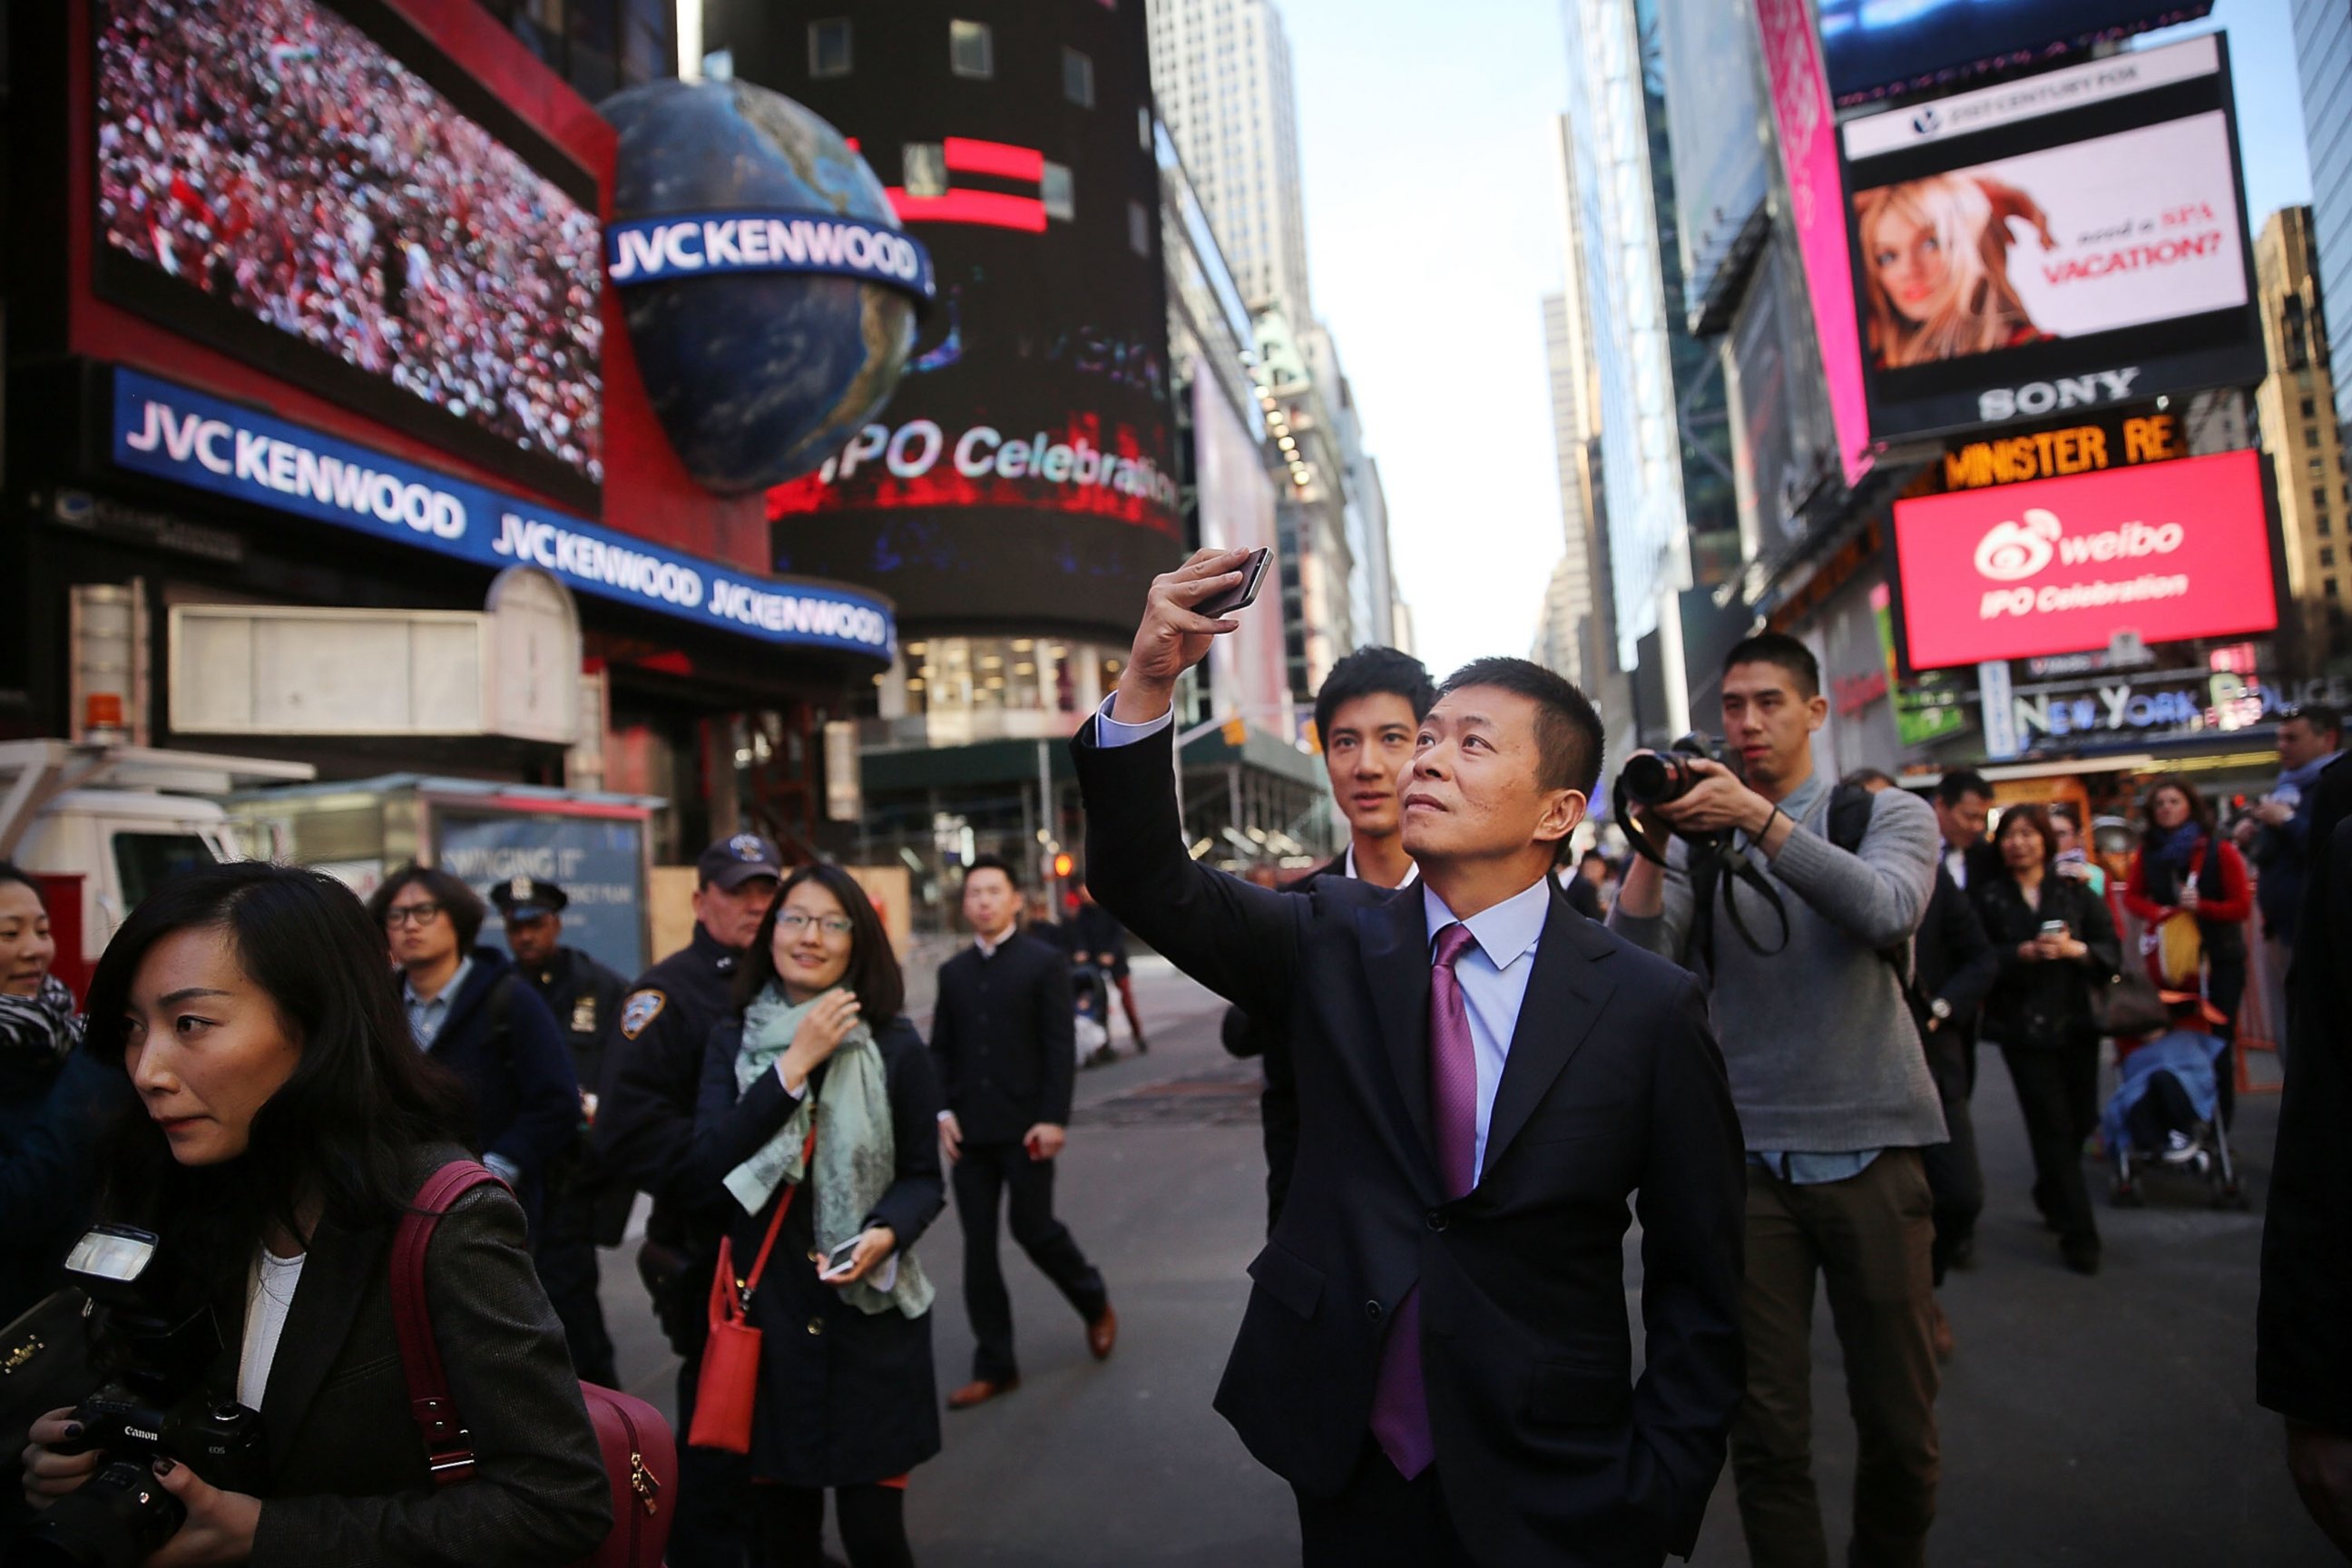 PHOTO: China's Weibo CEO Charles Chao takes a cell phone picture in Times Square moments after Weibo began trading on the Nasdaq exchange, April 17, 2014 in New York City.